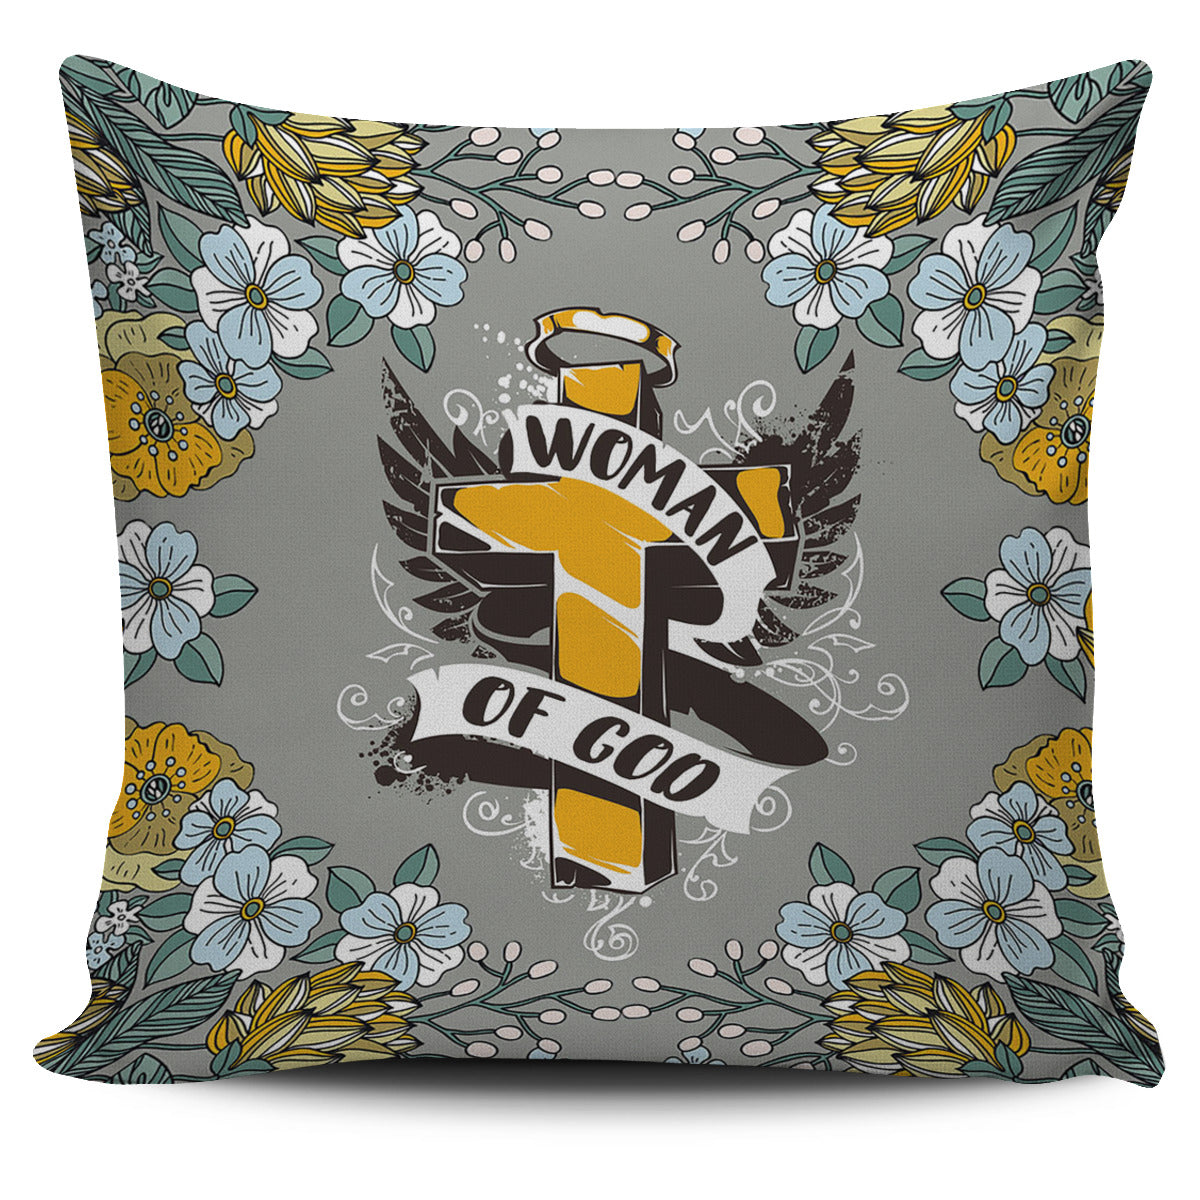 Woman Of God Pillow Cover